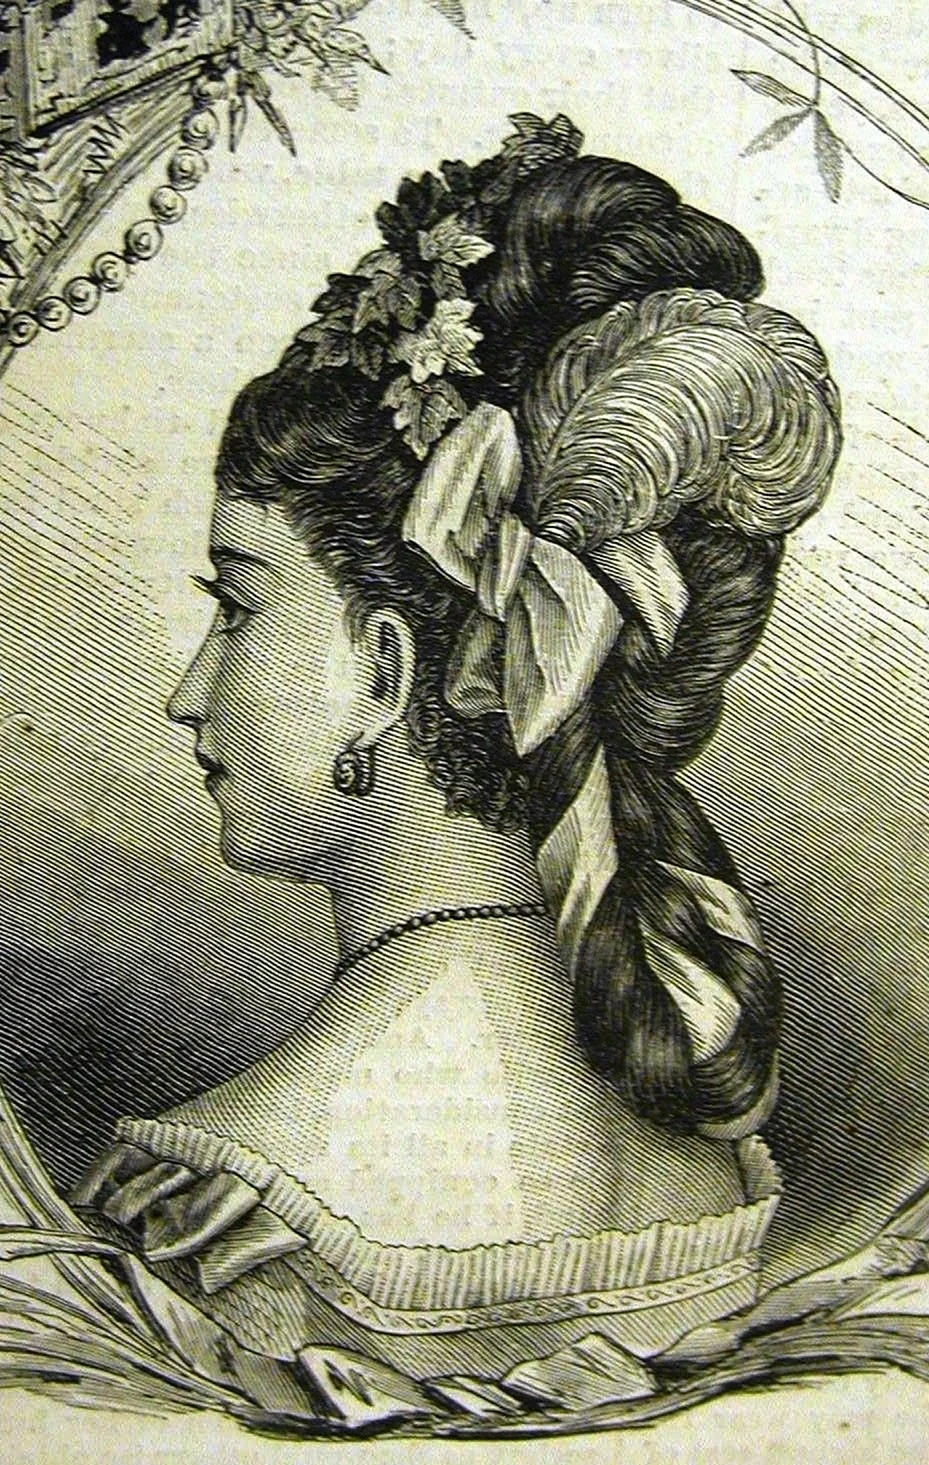 1800s Hairstyle